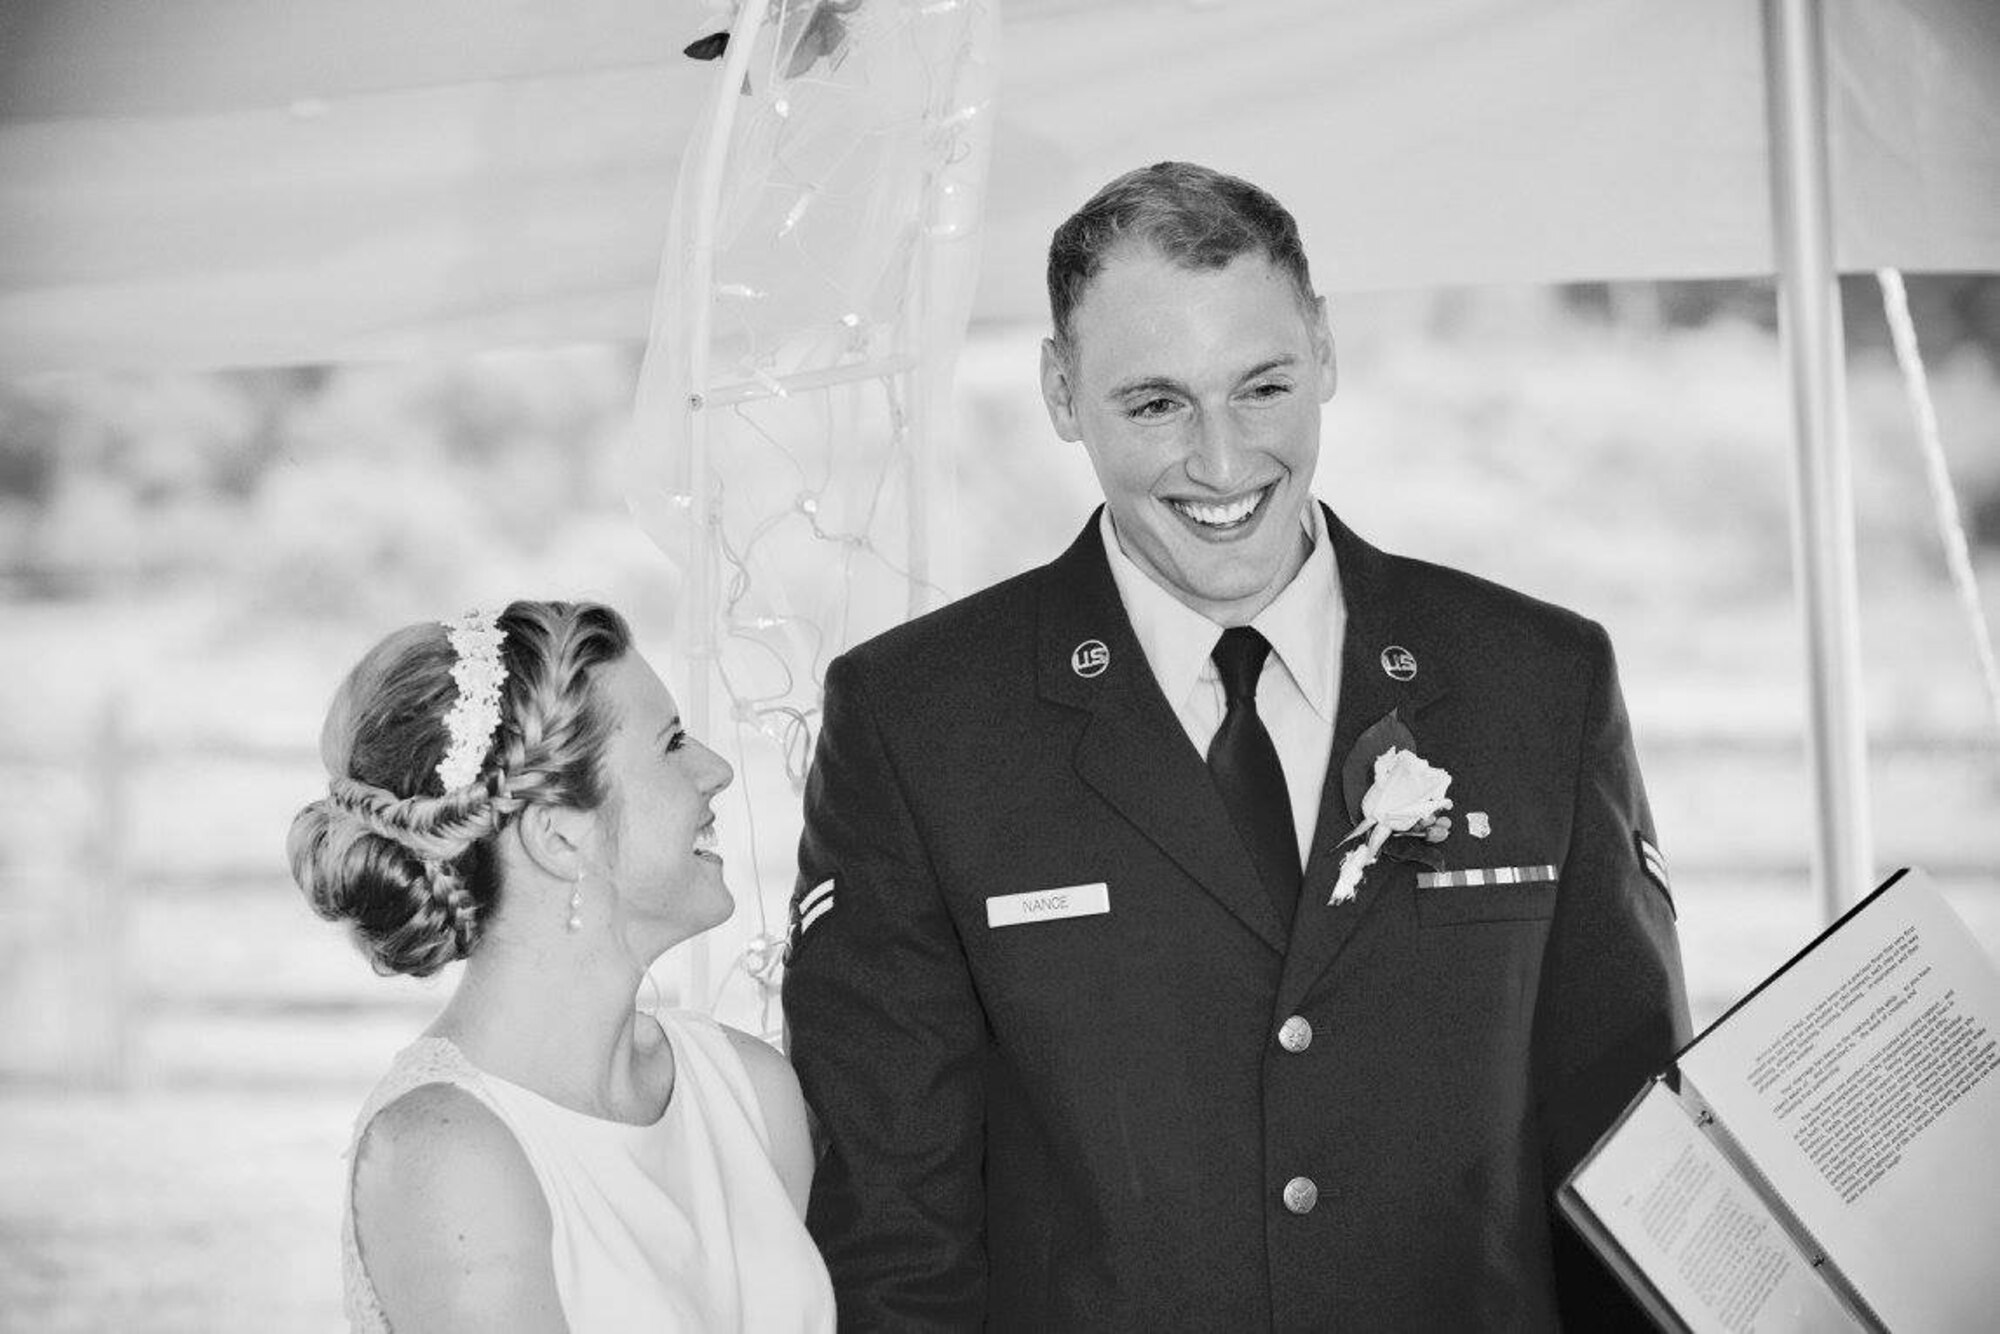 Then-Jessica Kerwin and then-Airman 1st Class John-Paul Nance recite their wedding vows, June 19, 2015, in Mansfield, Pa. Now that Staff Sgt. John Paul Nance has achieved his goals of graduating with a masters degree and commissioning as an officer, he said his new goal is to support his wife even more than she has supported him. (Courtesy photo)